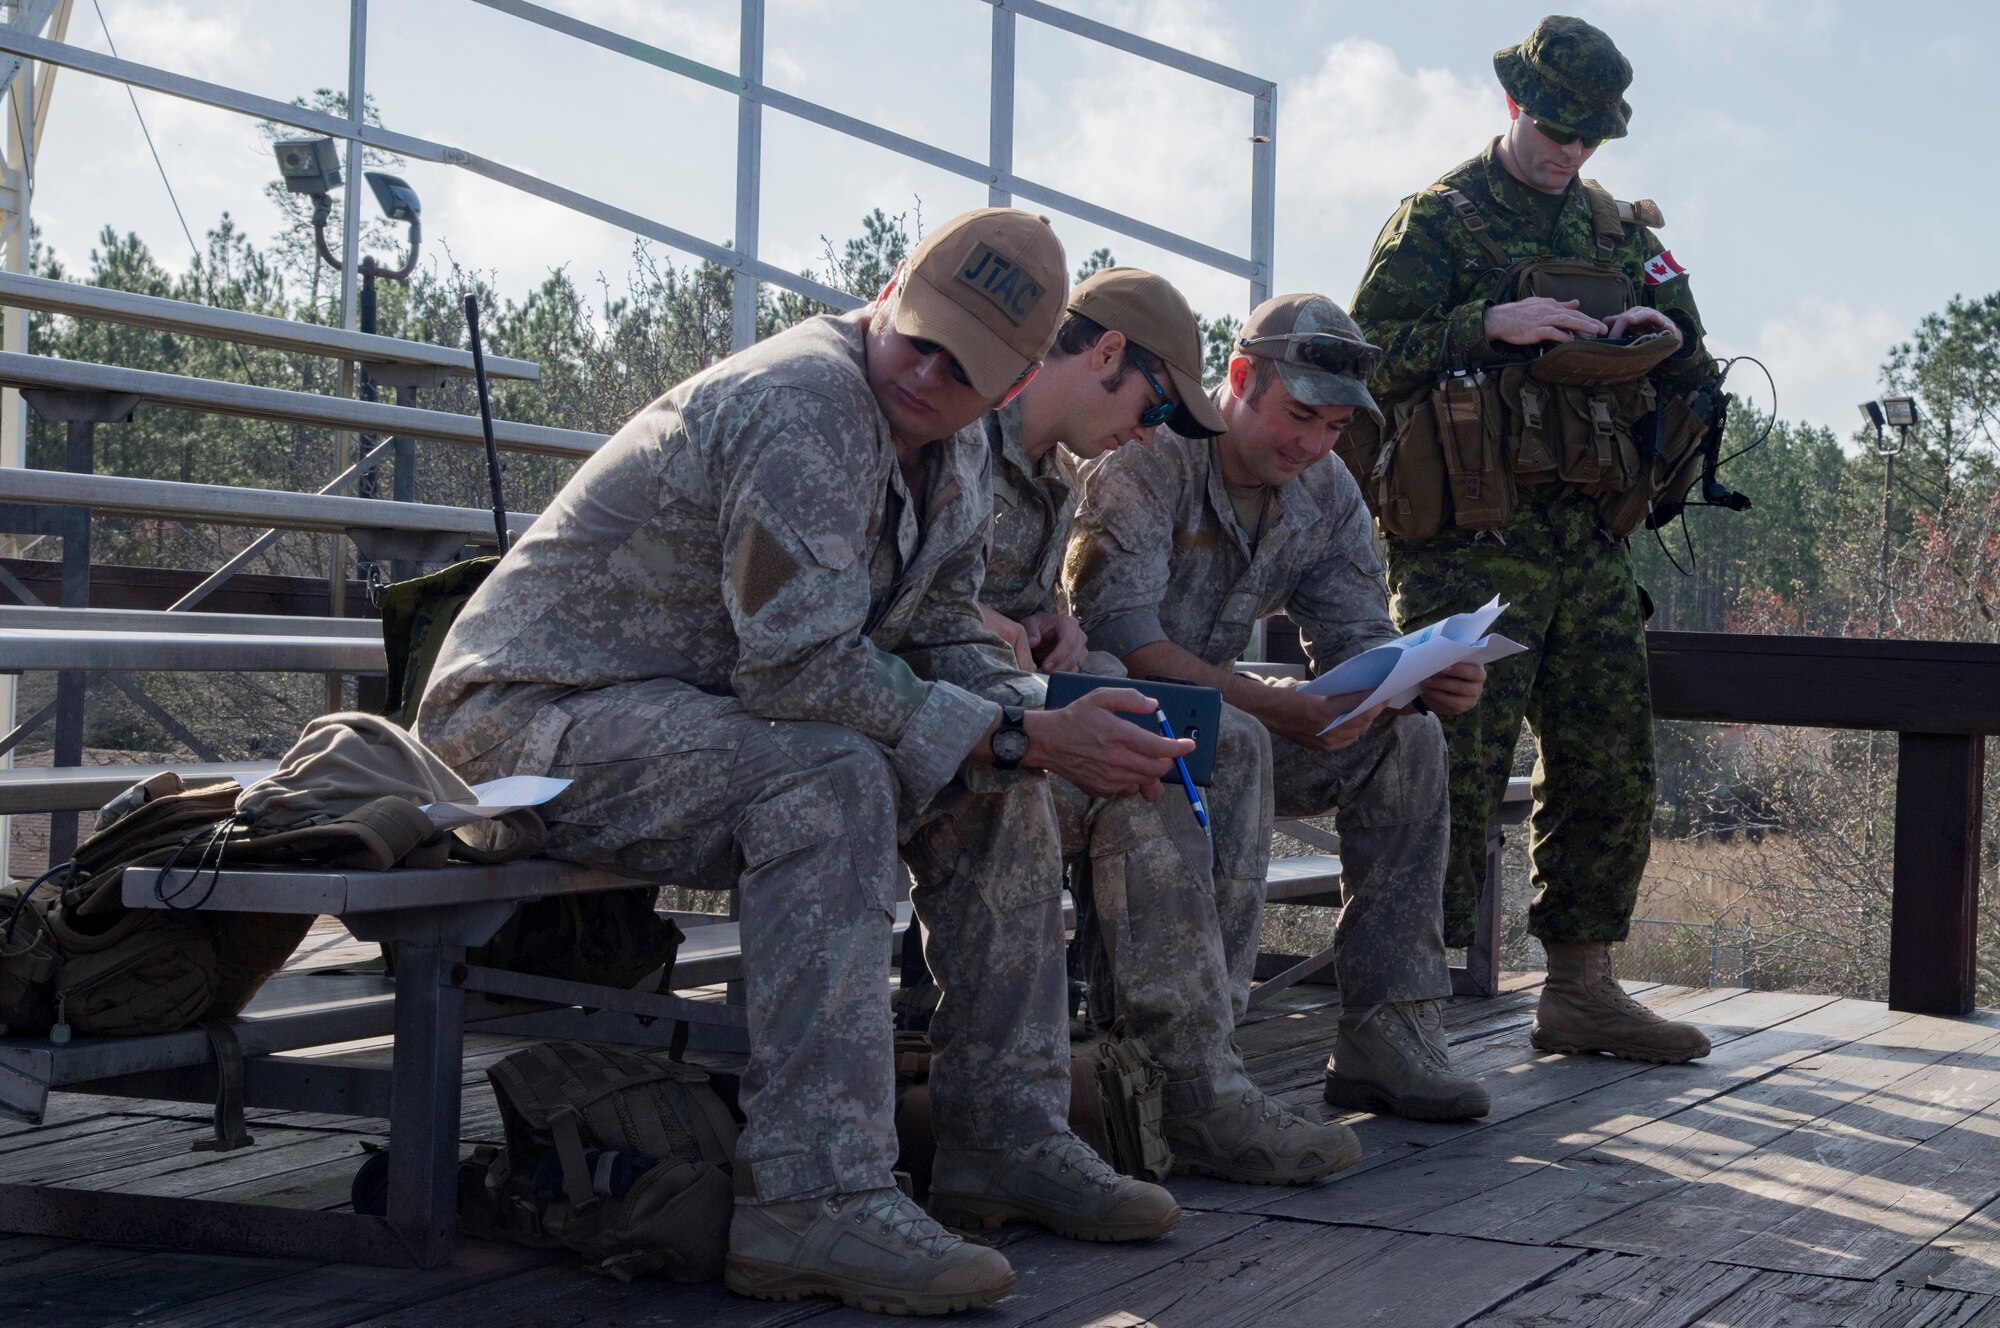 A group of Canadian Royal Air Force and New Zealand army joint terminal attack controllers discuss mission planning prior to combined training, Feb. 21, 2018, at Moody Air Force Base, Ga. Ally forces from the CRAF and NZA traveled to Moody AFB to train with the 75th Fighter Squadron on close air support. (U.S. Air Force photo by Staff Sgt. Eric Summers Jr.)